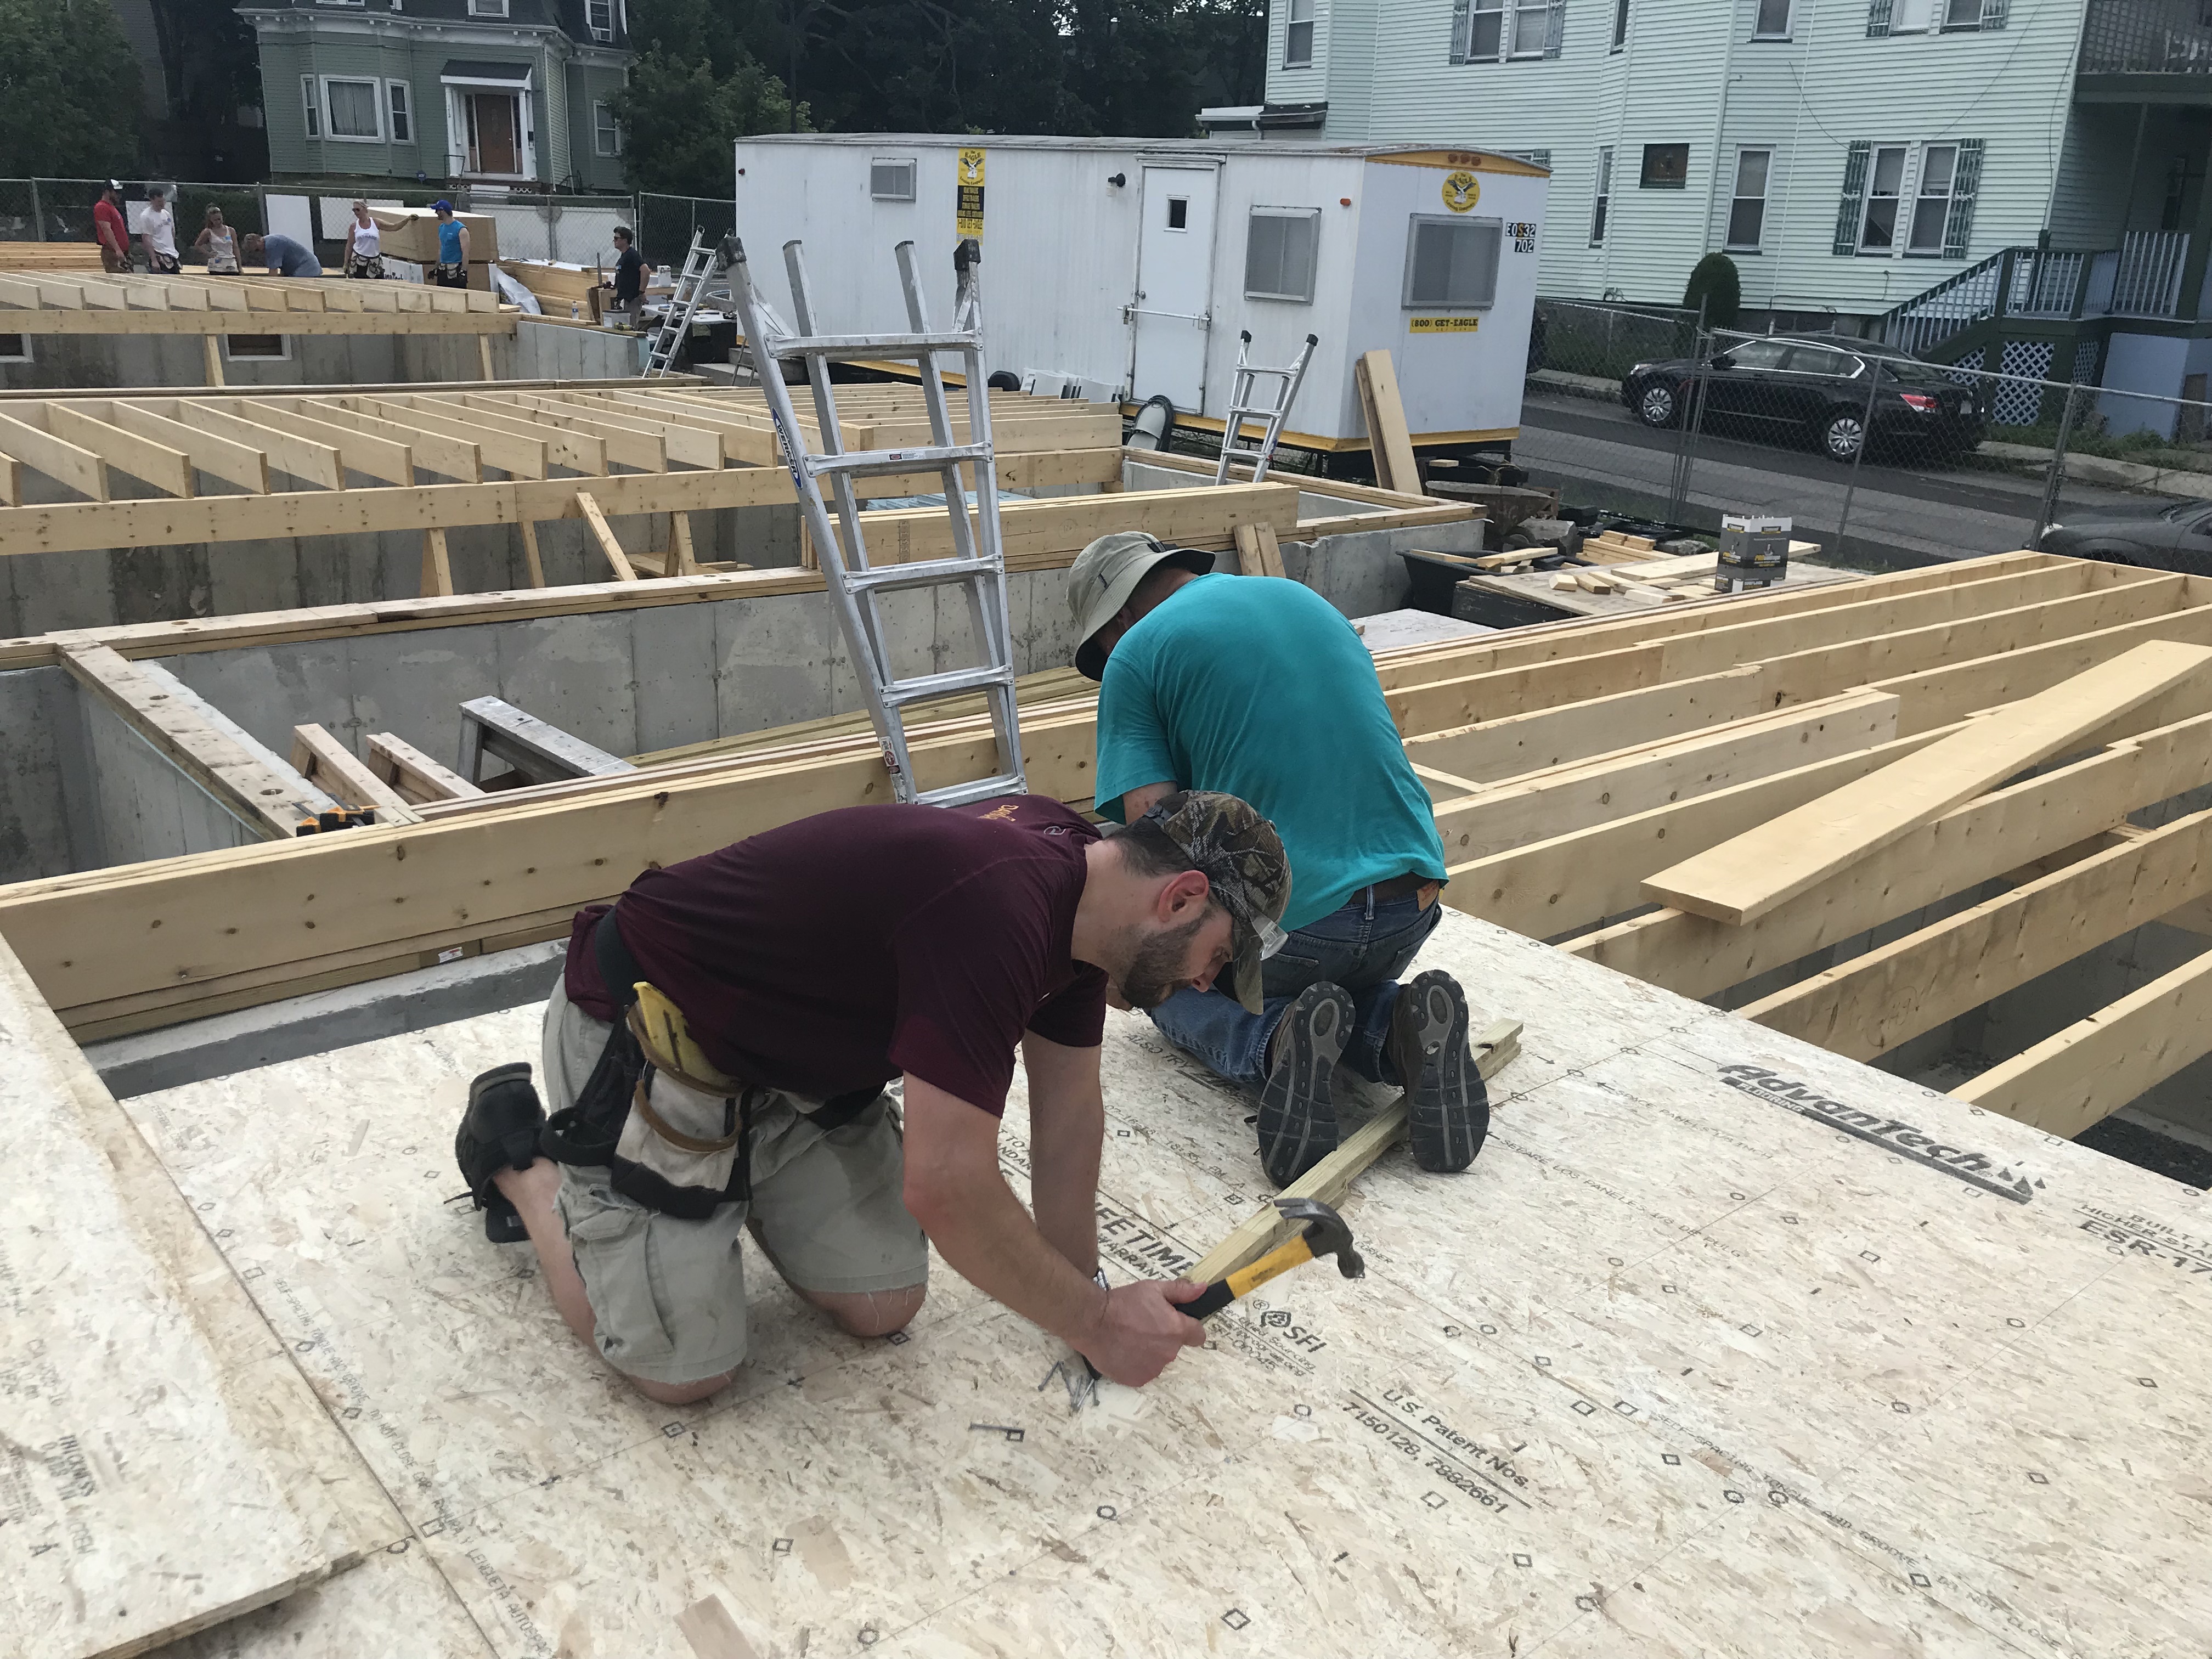 Daymark Employees Provide Hands-On Support for Habitat for Humanity